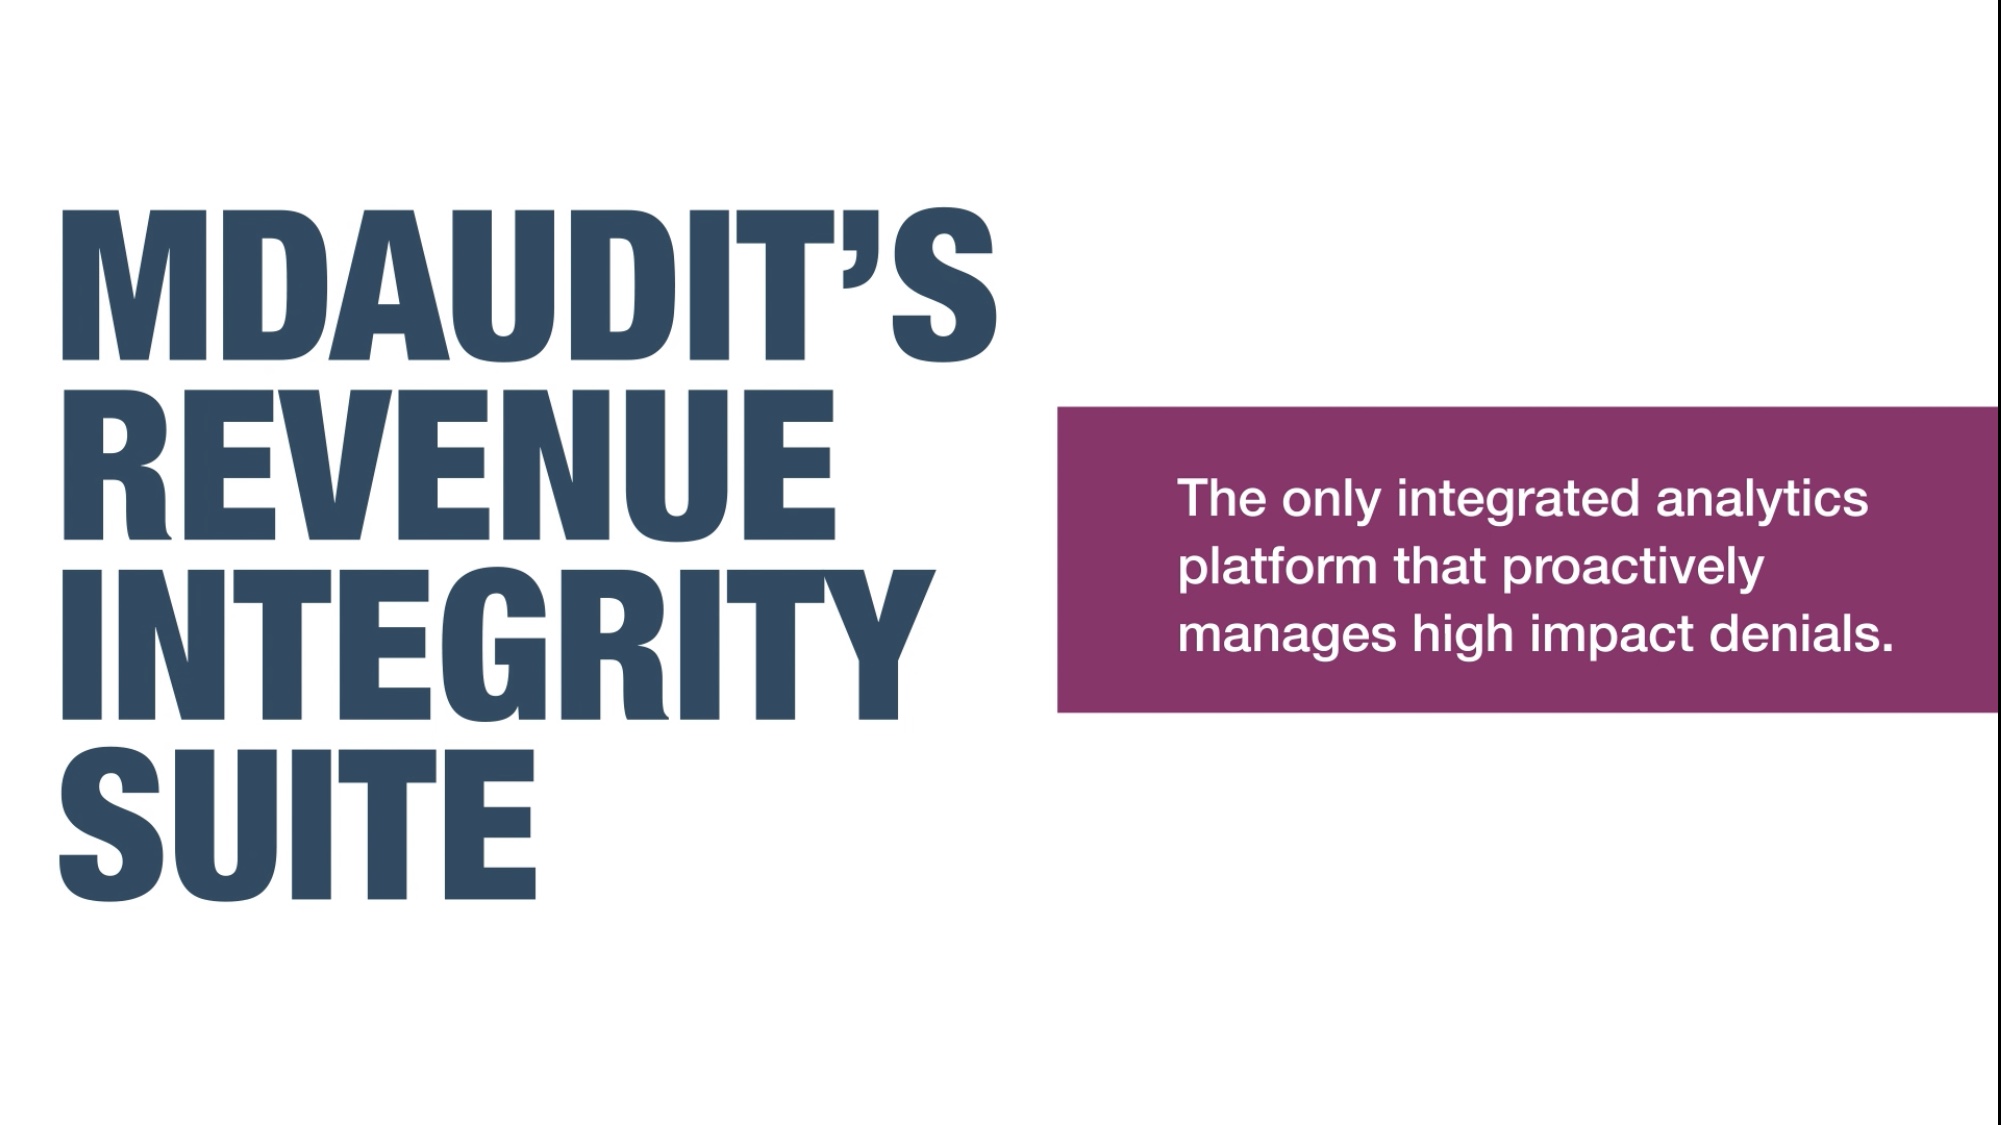 MDaudit Launches Revenue Integrity Suite to Mitigate High-Impact Denial Risk and Prevent Revenue Leakage